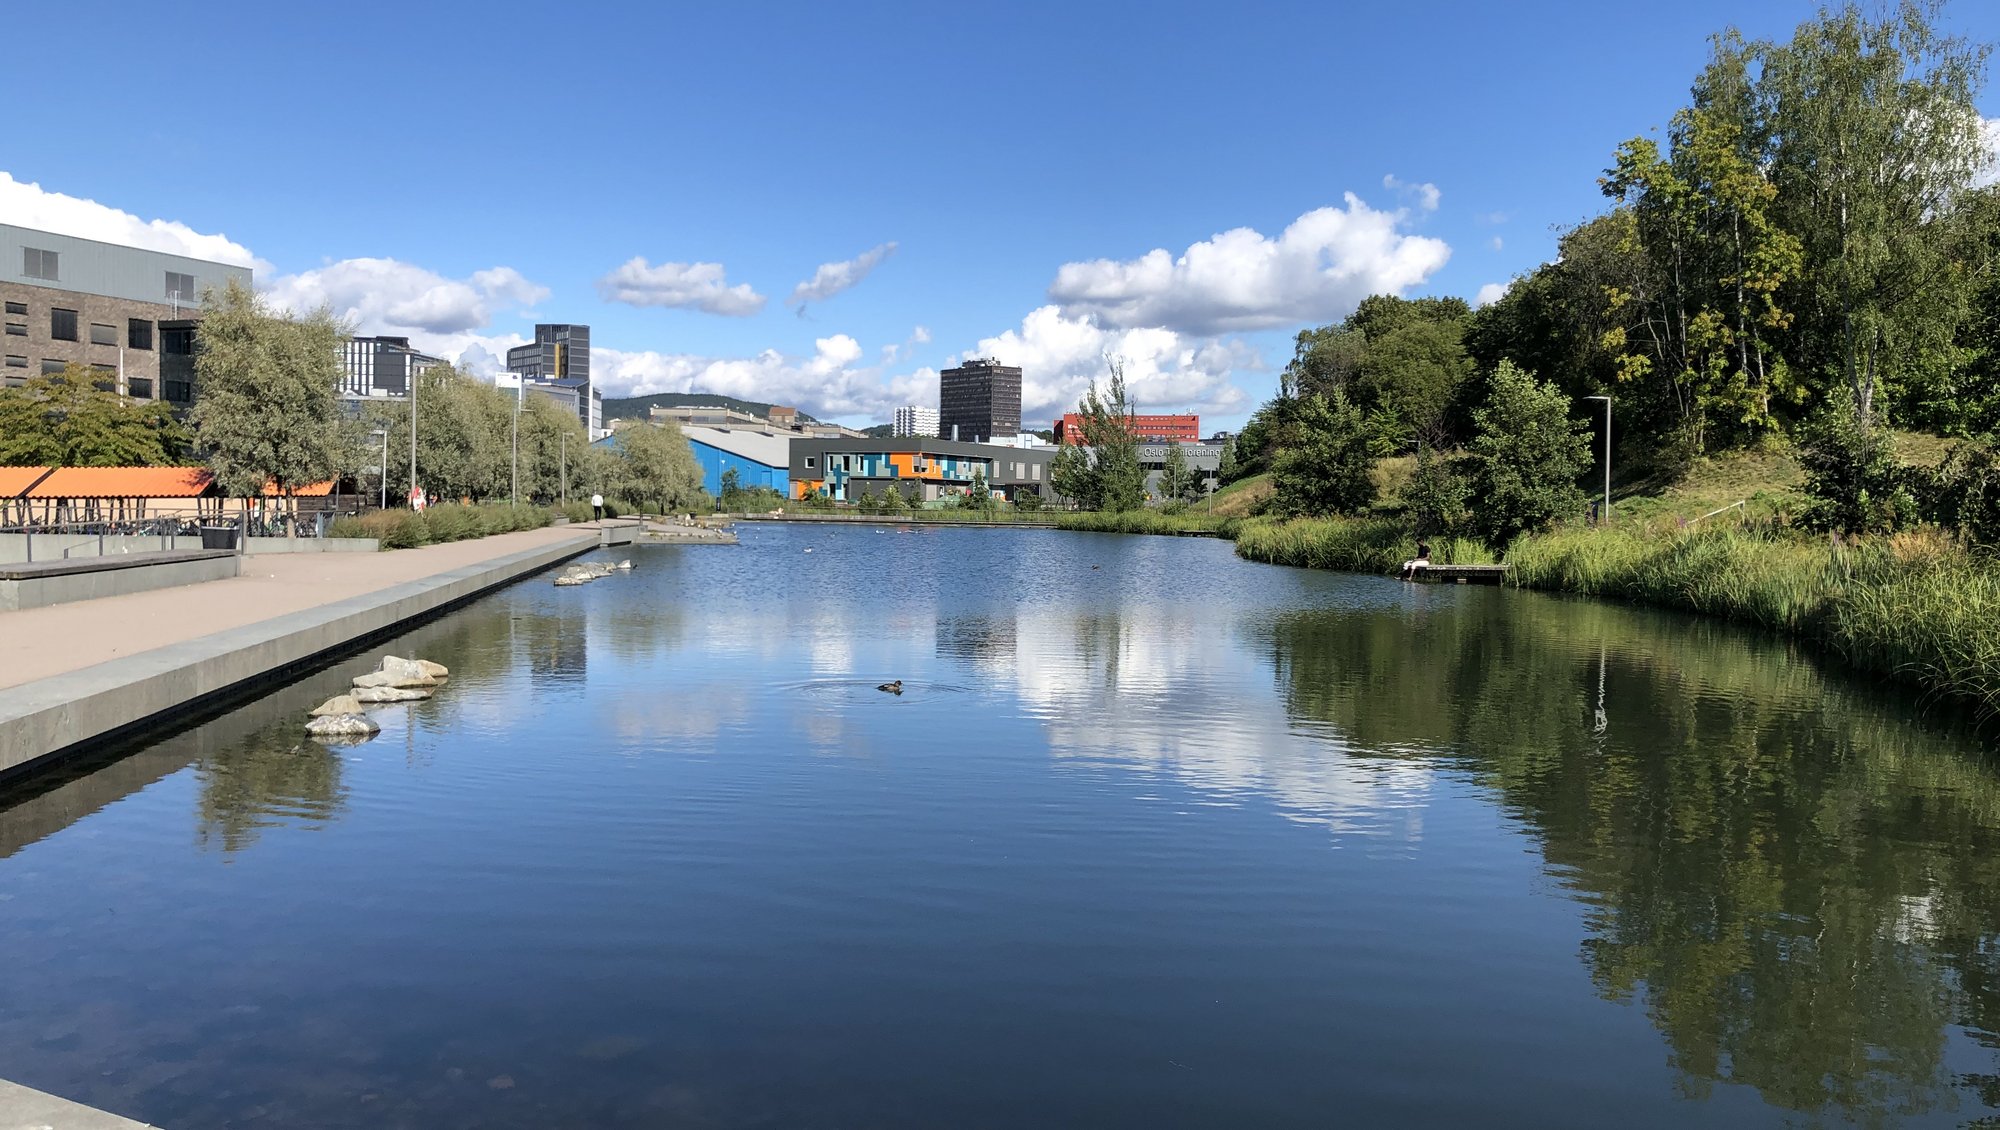 A very big body of water is surrounded by concrete walls. In the water are several ducks. On the left side is the city, and on the right side nature is leaning onto the water,